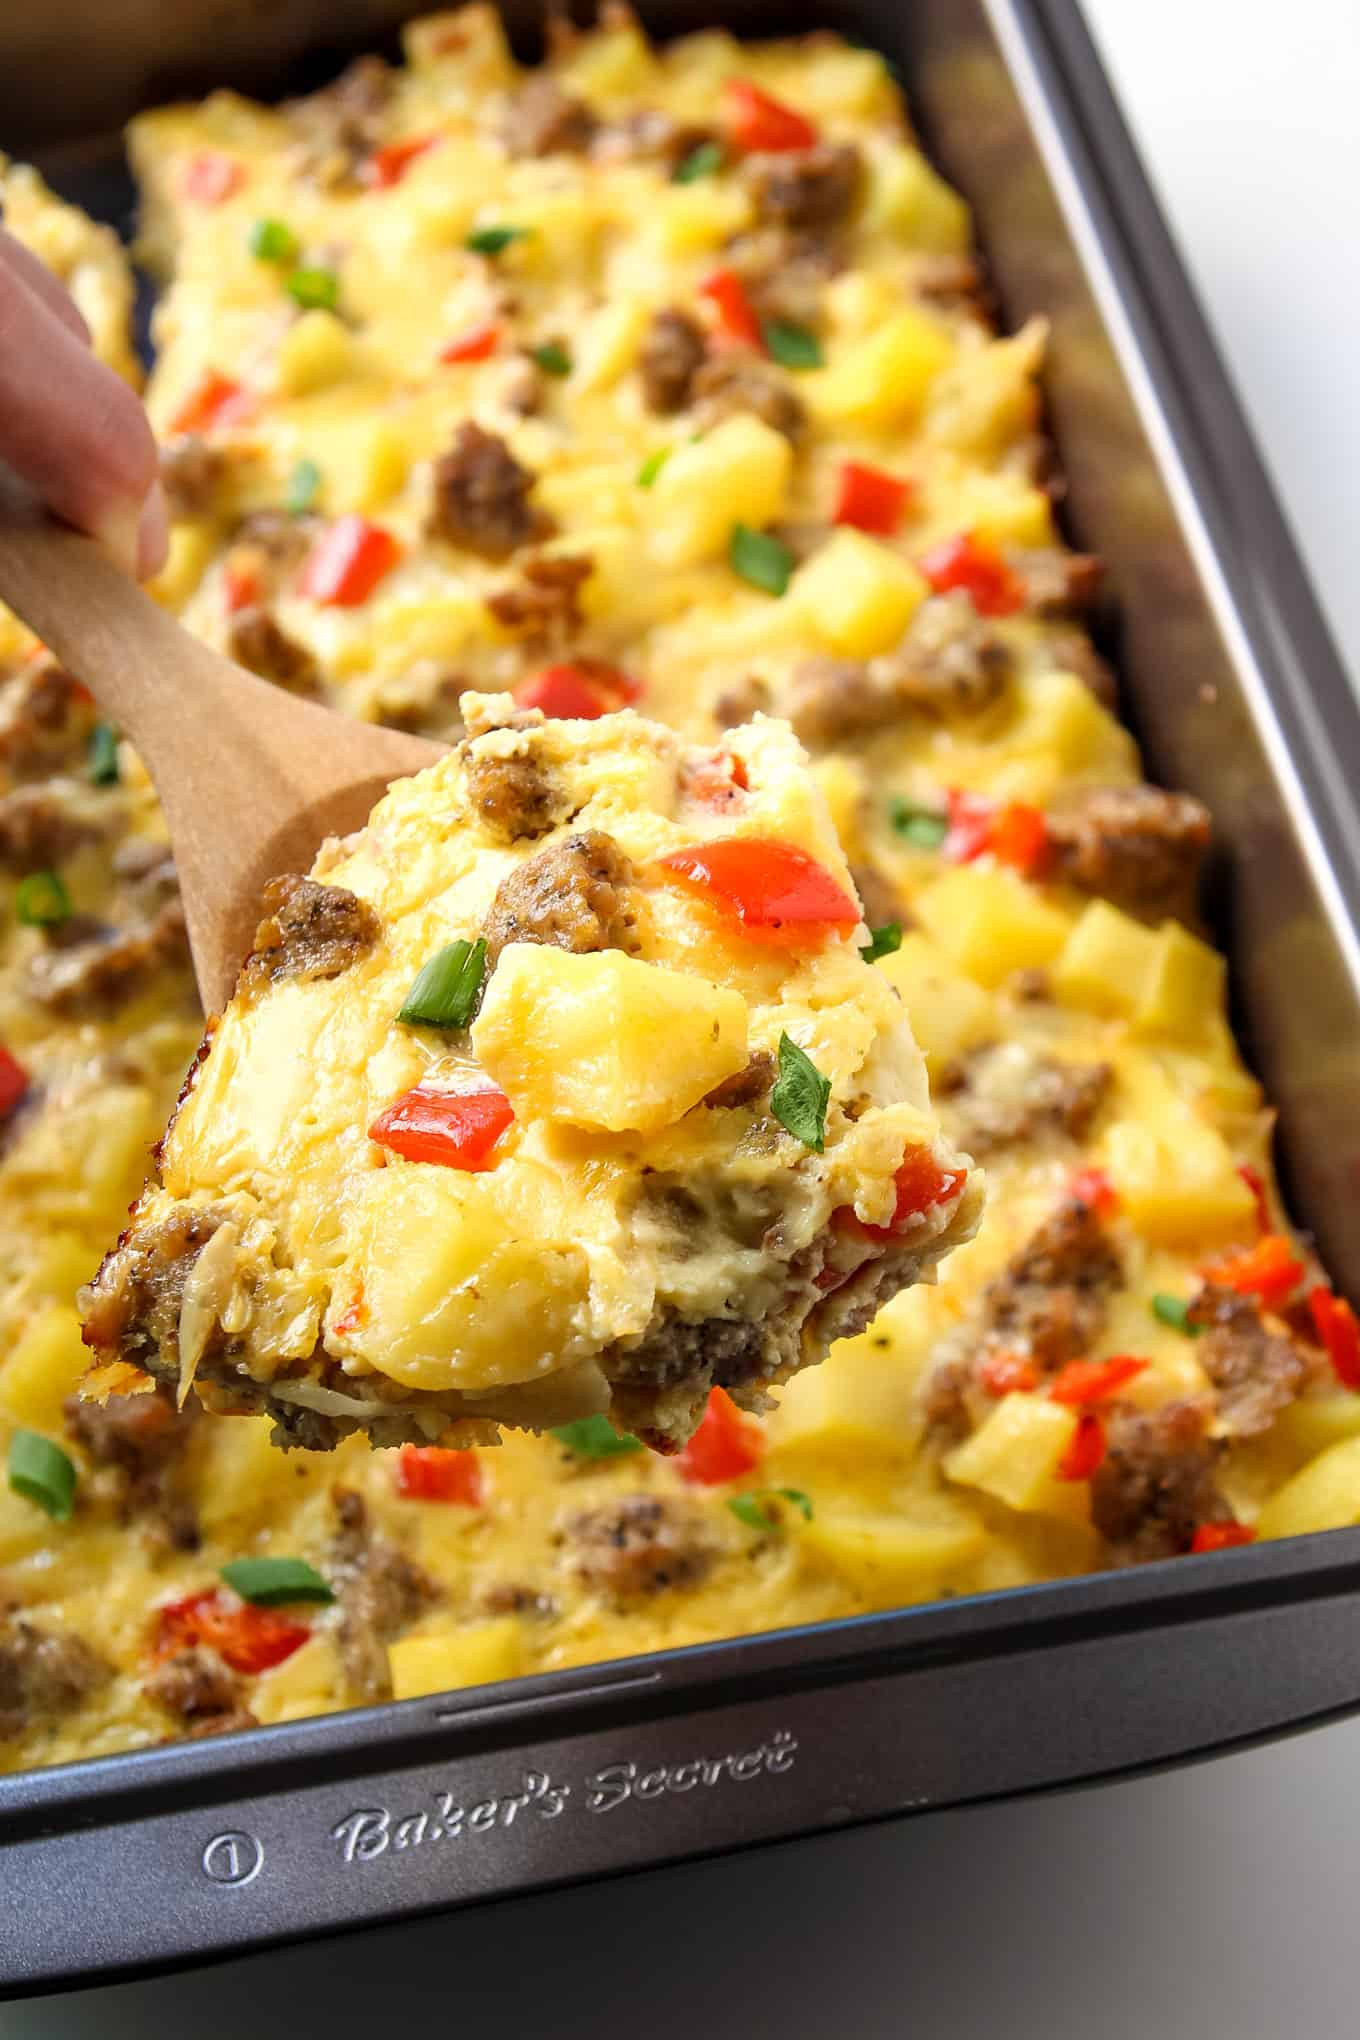 Recipe For Breakfast Casserole With Sausage
 Breakfast Casserole with Eggs Potatoes and Sausage